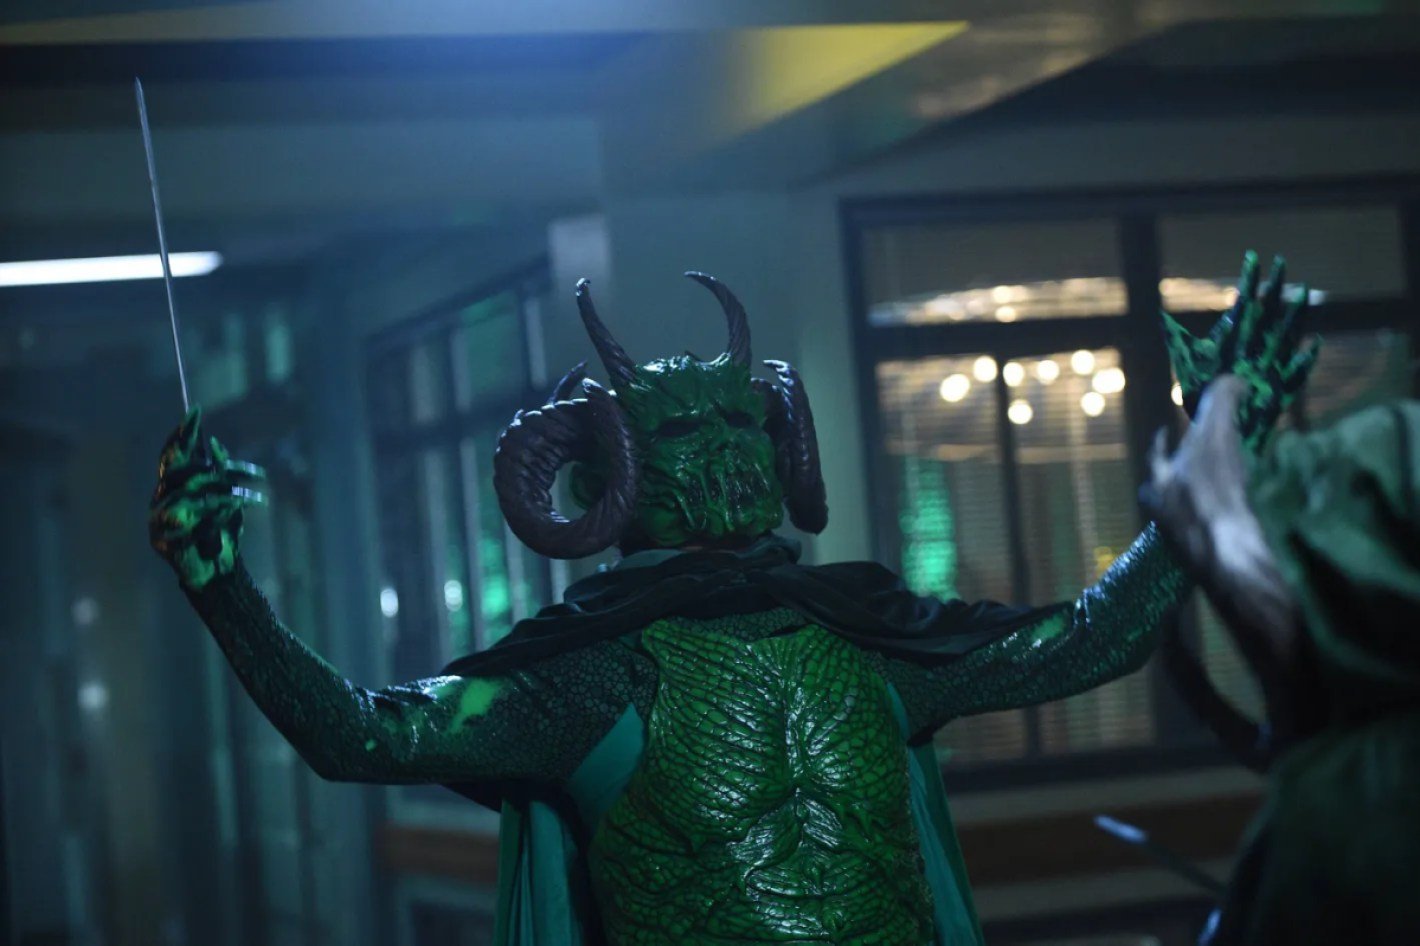 The Green Meanie being dramatic in Scream Queens s2